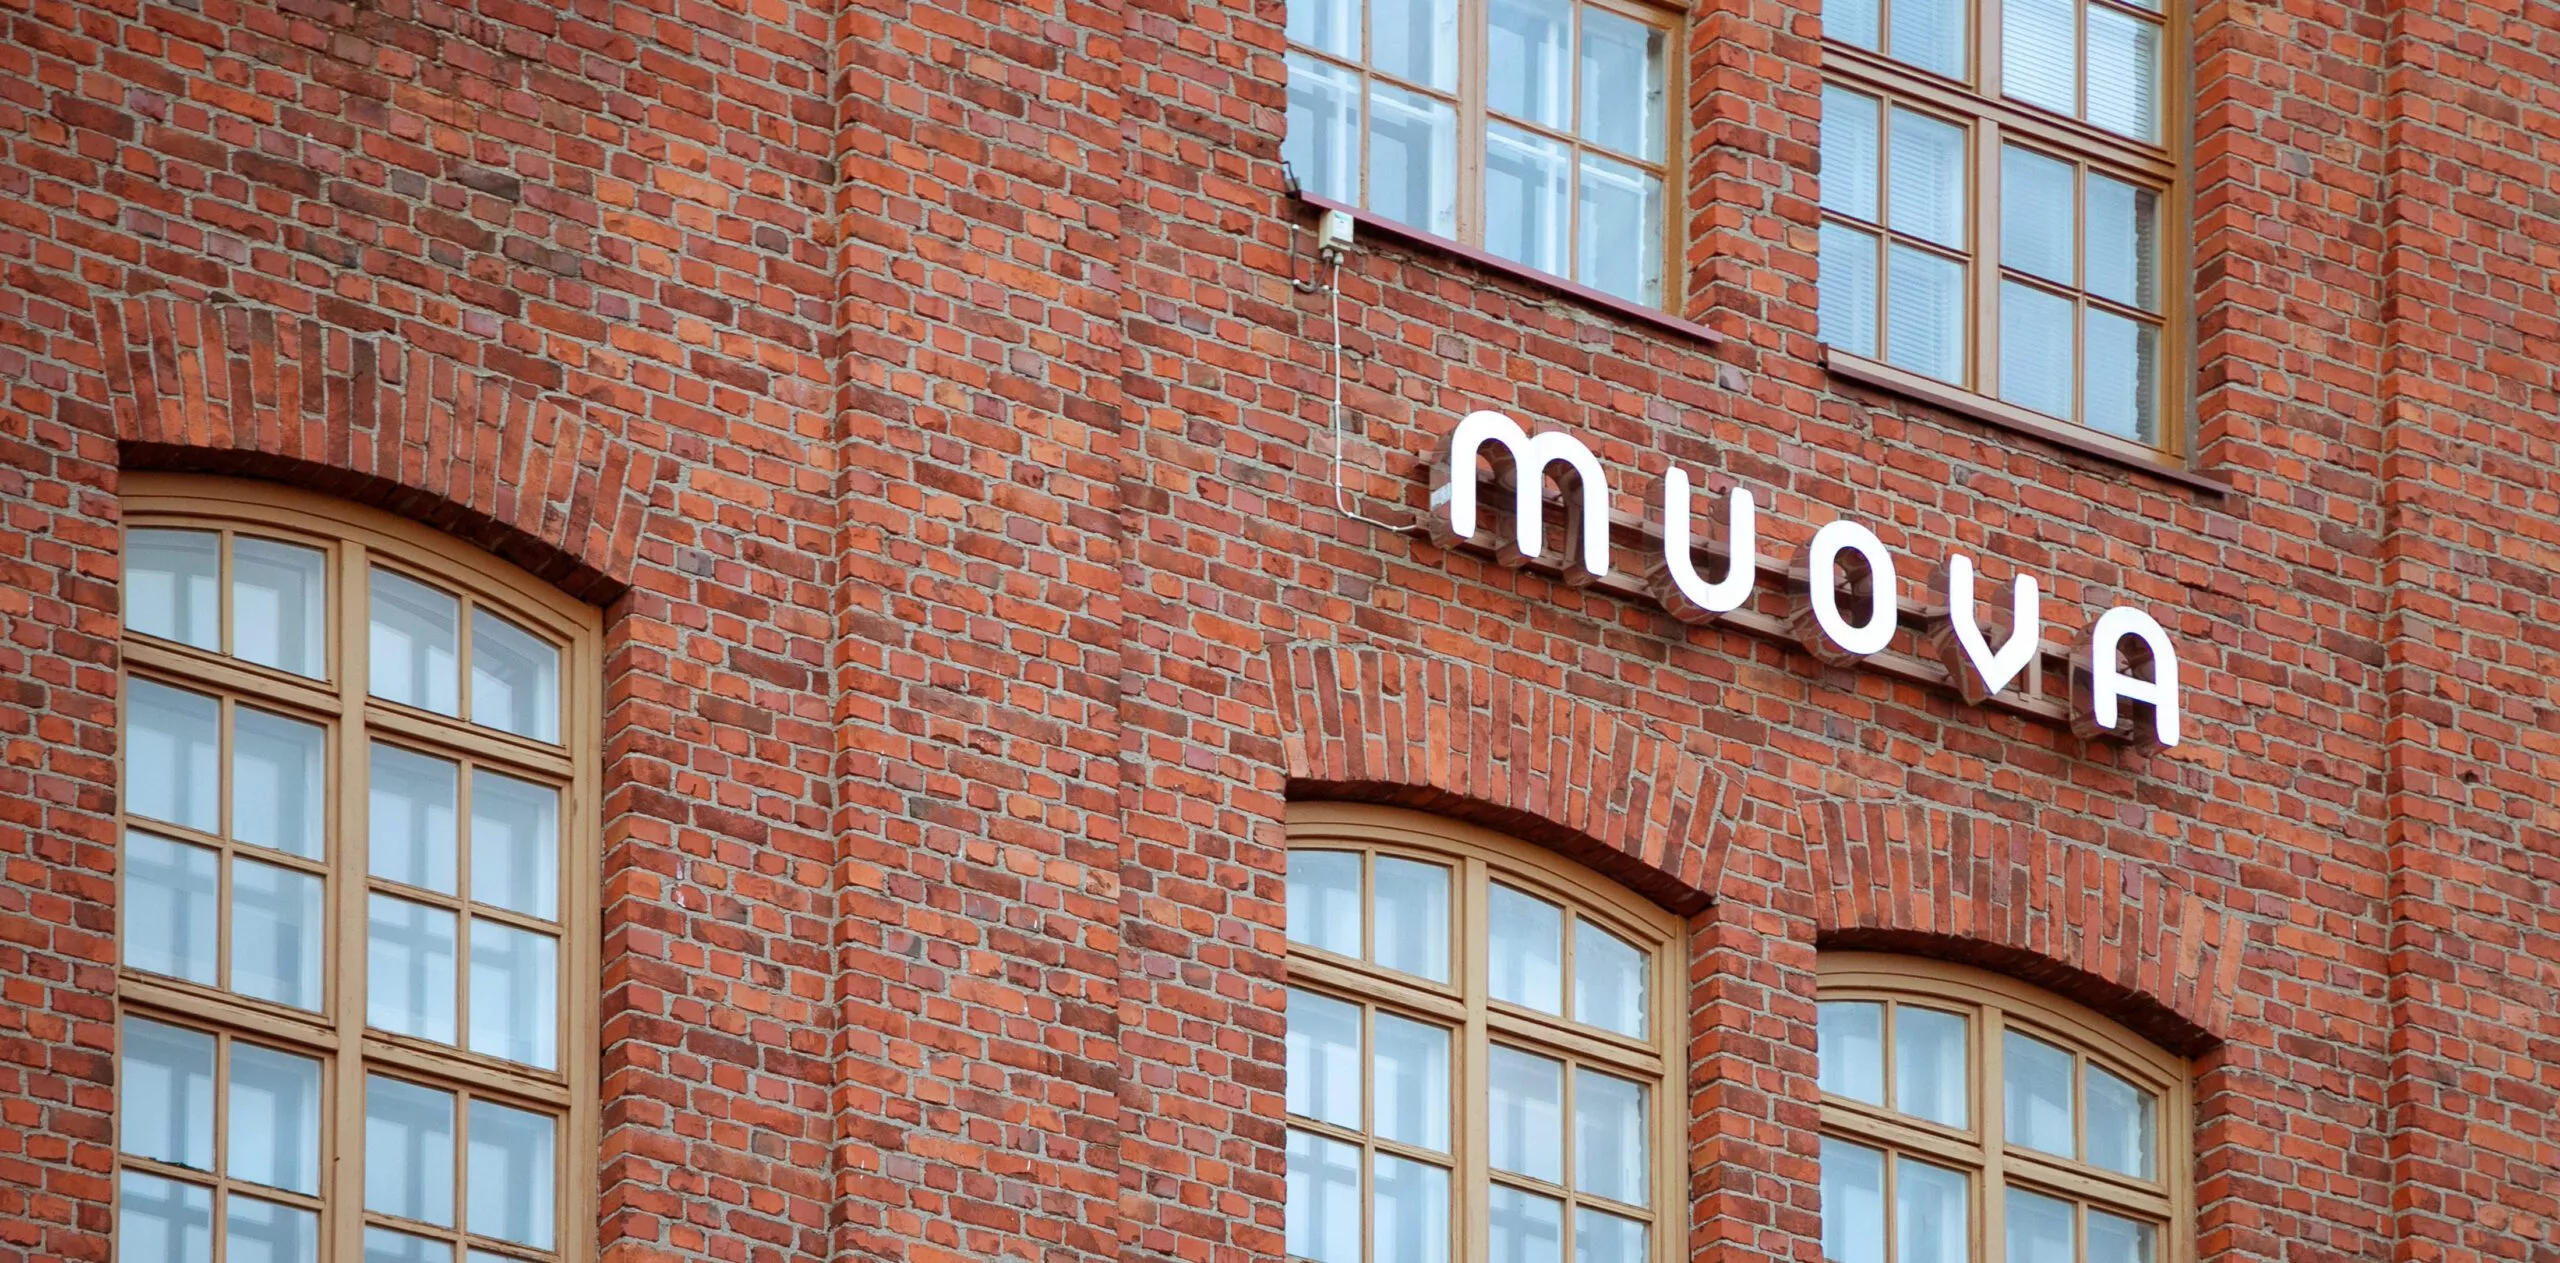 Significant funding for MUOVA to design sustainable industrial systems